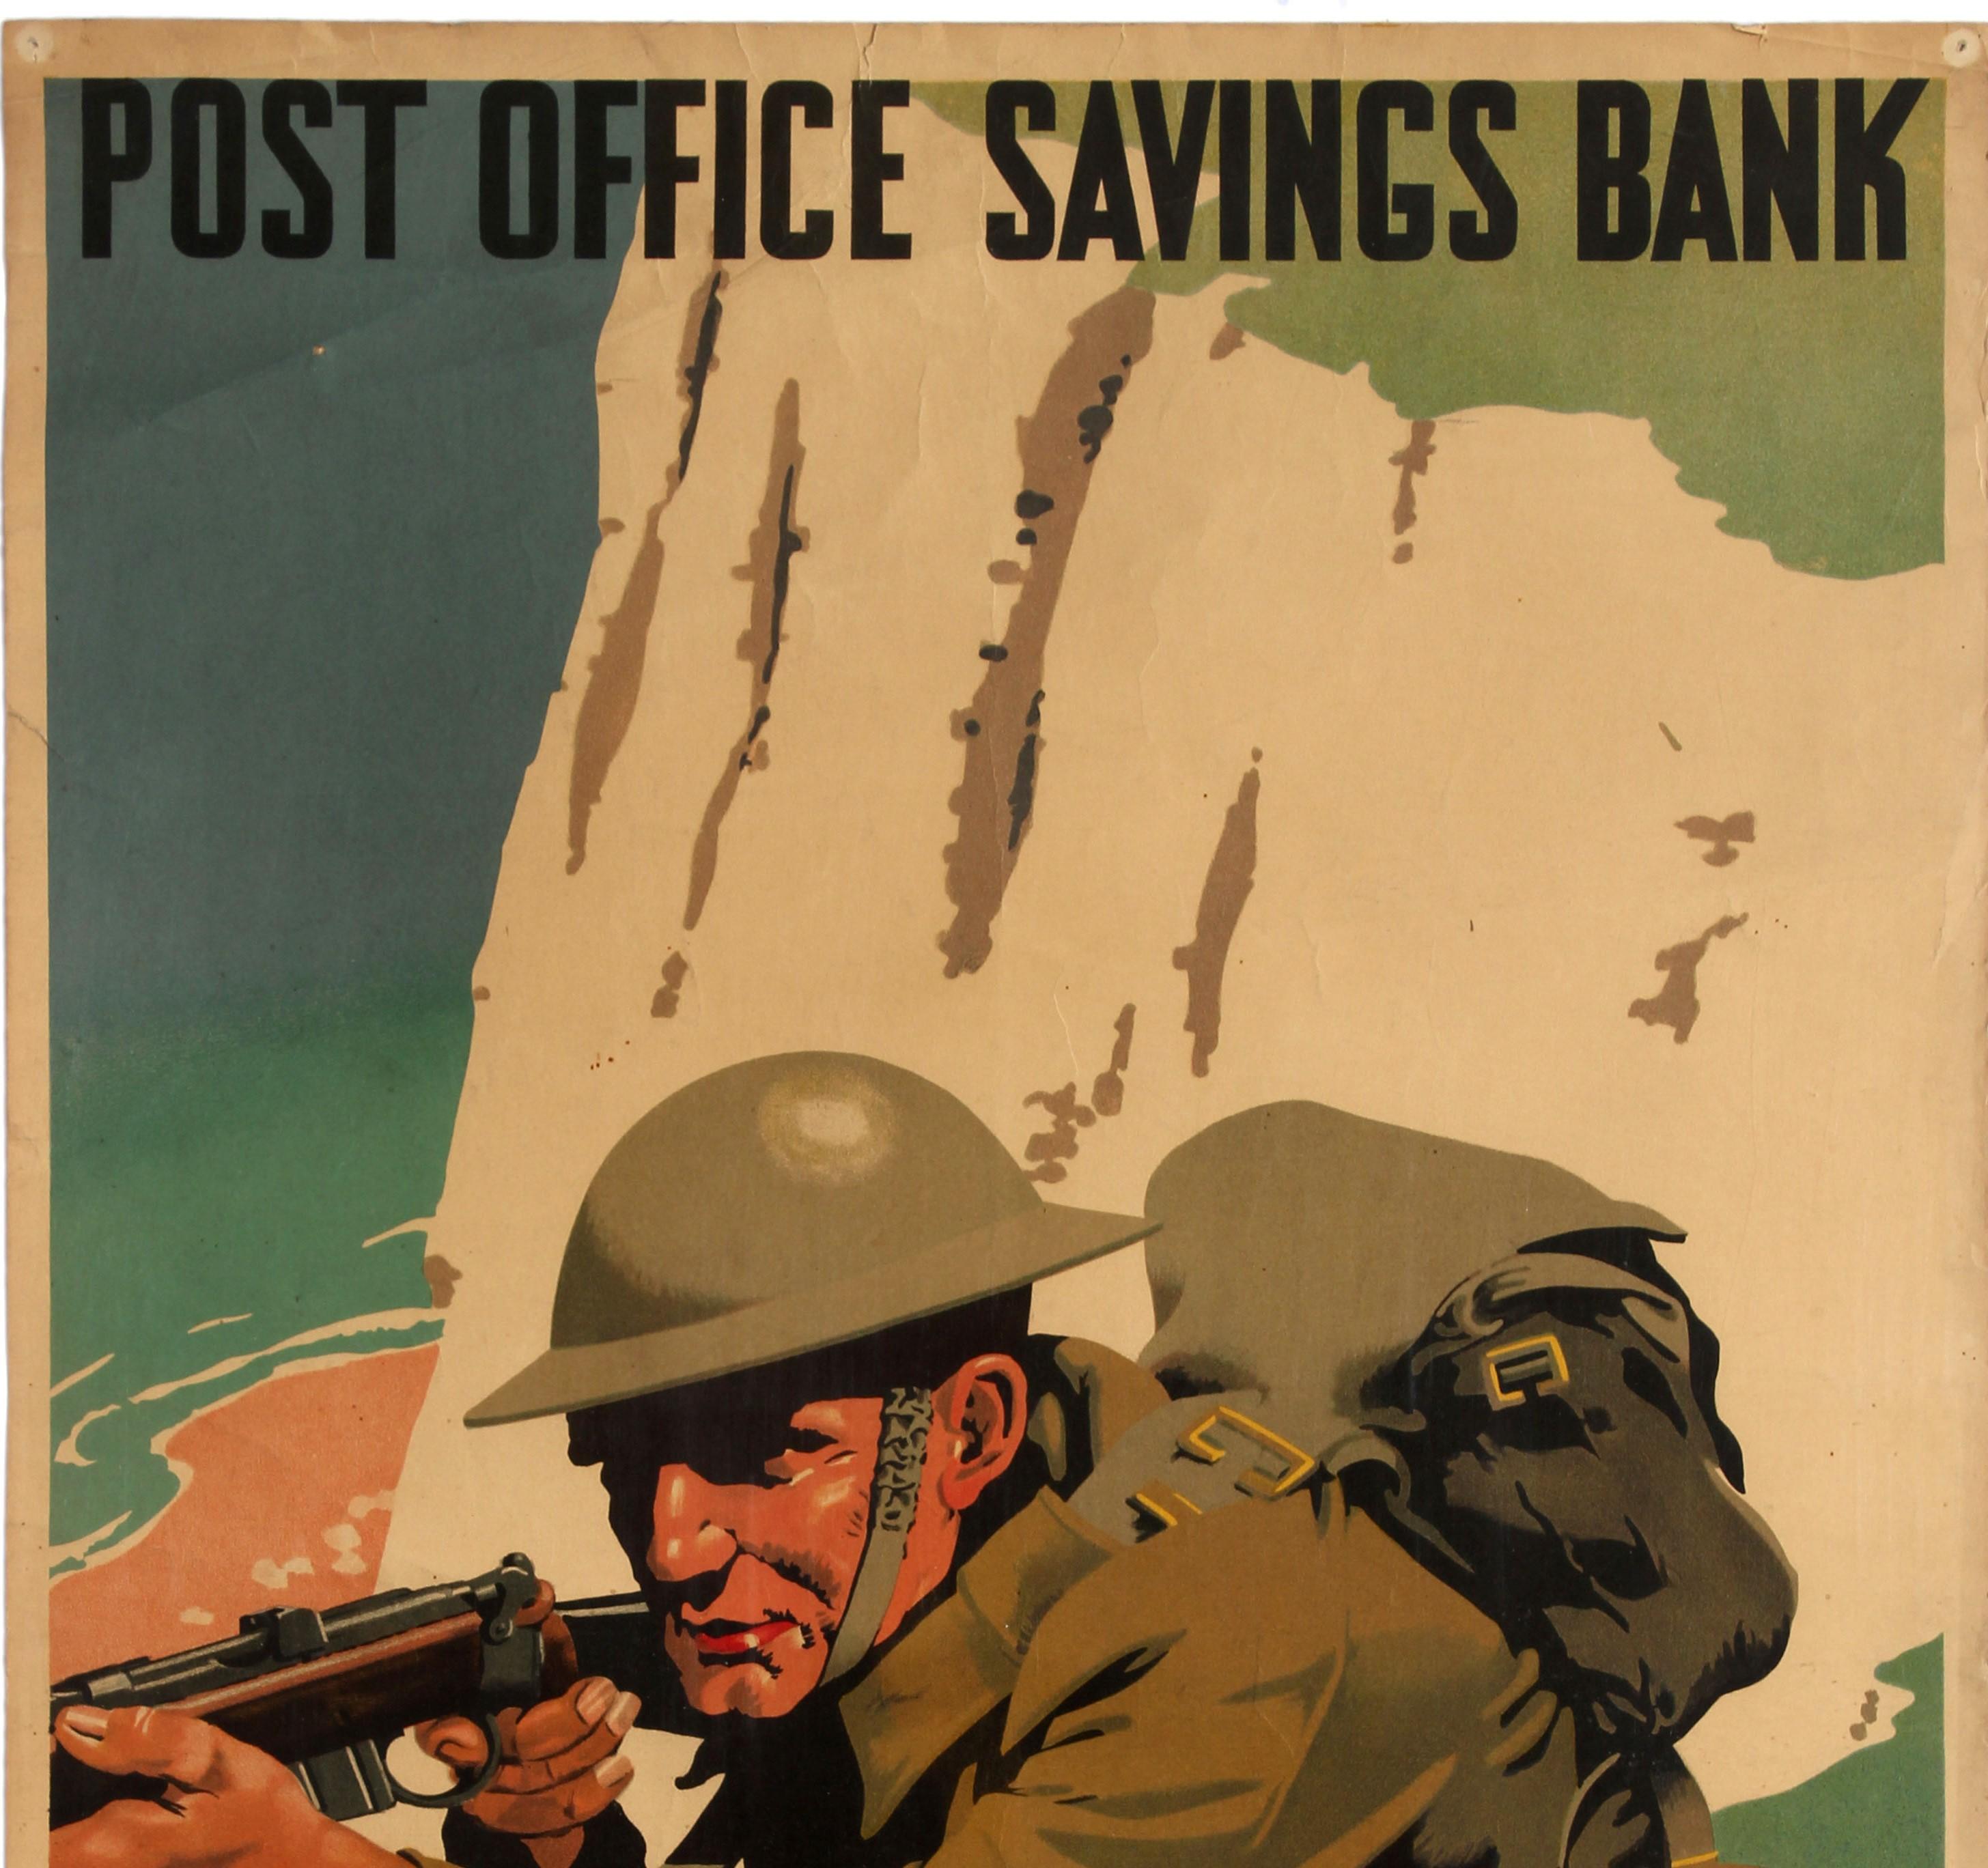 Original vintage World War Two home front propaganda poster published by the Post Office Savings Bank Save for Defence featuring dynamic artwork by the notable British poster artist Frank Newbould (1887-1951) depicting a soldier in uniform crouching